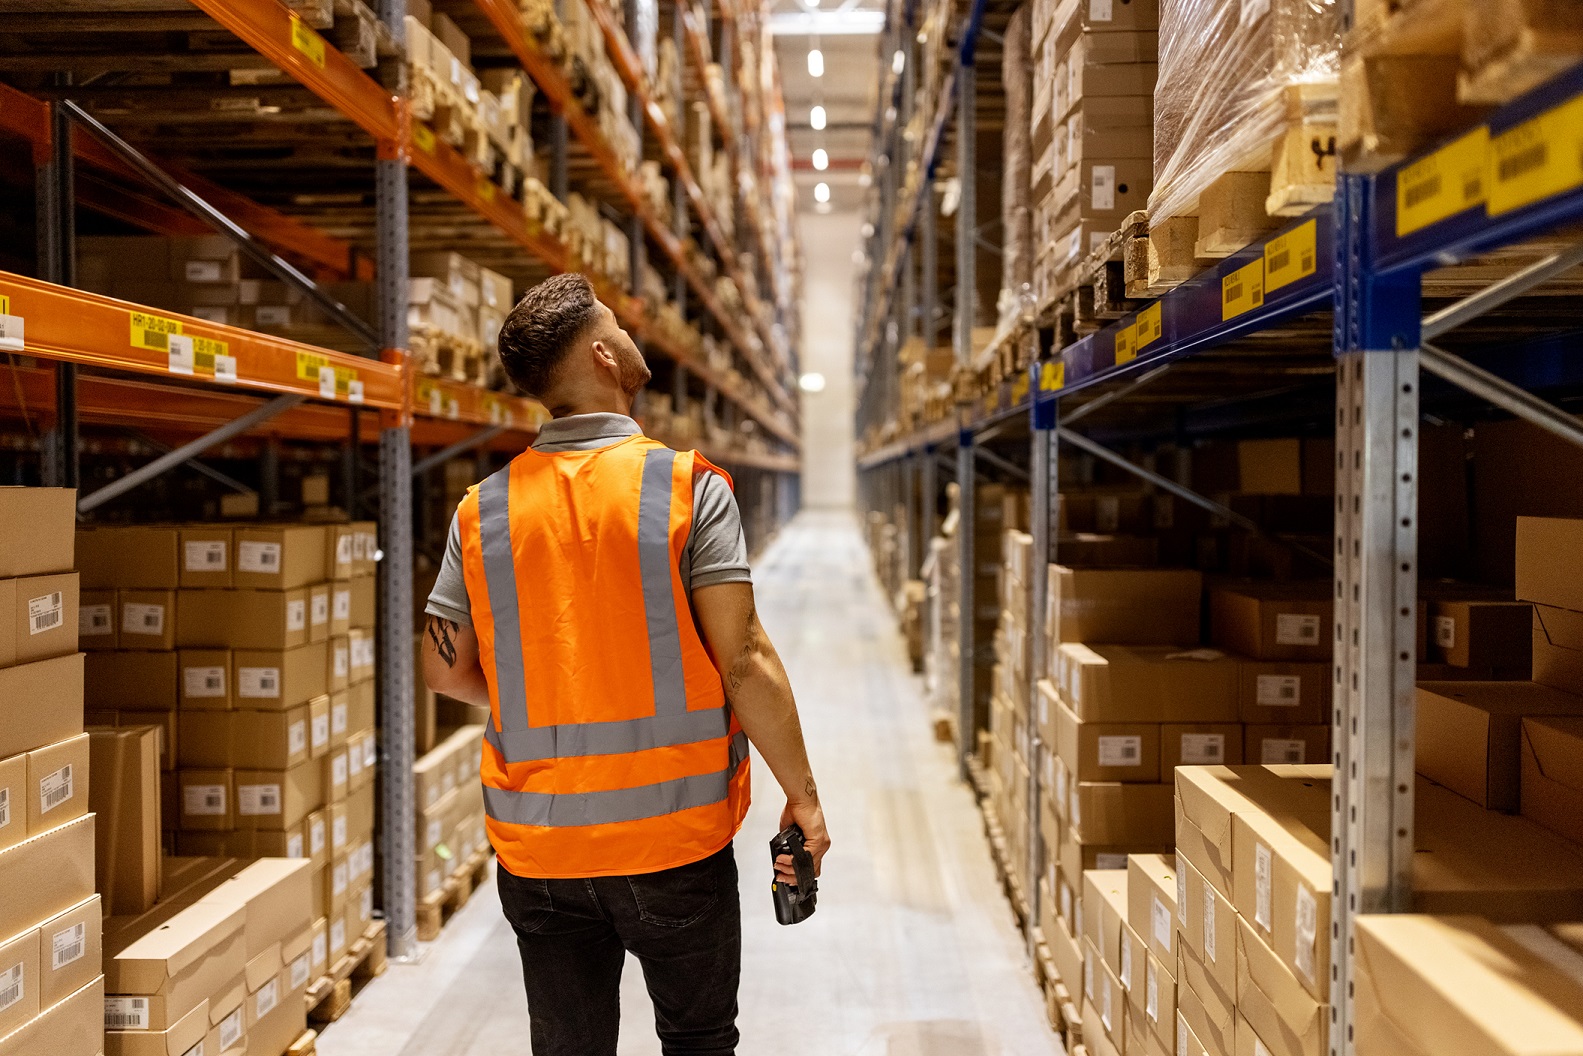 A man confidently strides through a bustling distribution warehouse, surrounded by stacks of pallets and shelves filled with goods. The warehouse is a hive of activity, with workers efficiently moving products and machinery humming in the background. The man's purposeful demeanor reflects the value of investing in warehouses and industrial real estate, highlighting their role as crucial components of supply chains and economic infrastructure. The scene underscores the potential for growth and stability in this sector, as businesses rely on warehouses to store and distribute goods, making them attractive investments in the realm of commercial real estate.